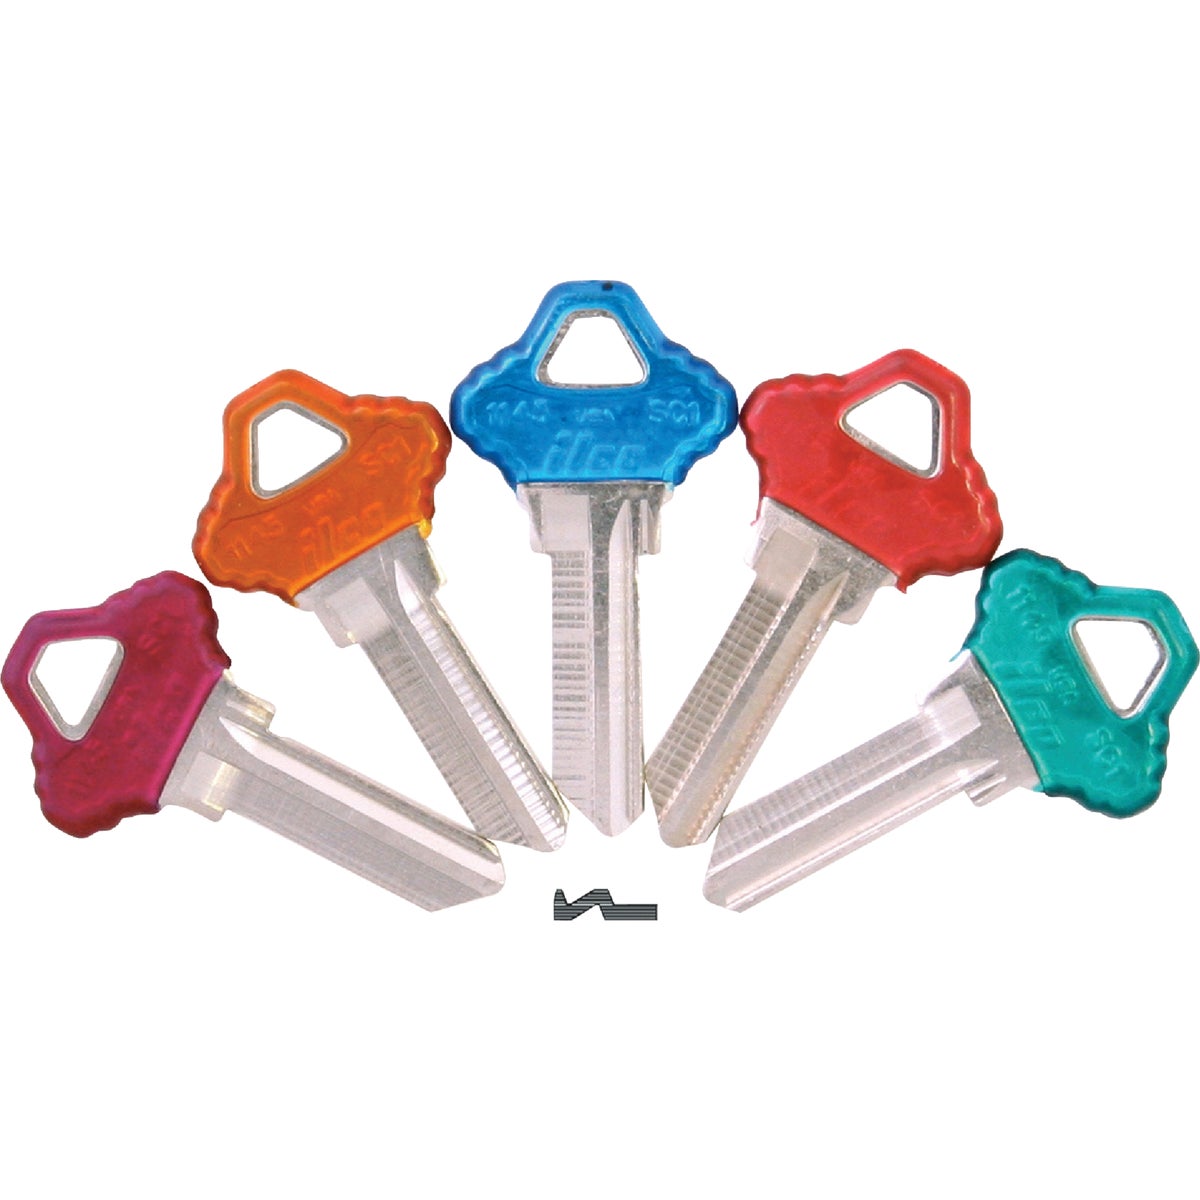 Item 235601, Nickel-plated key blank with plastic-coated head.